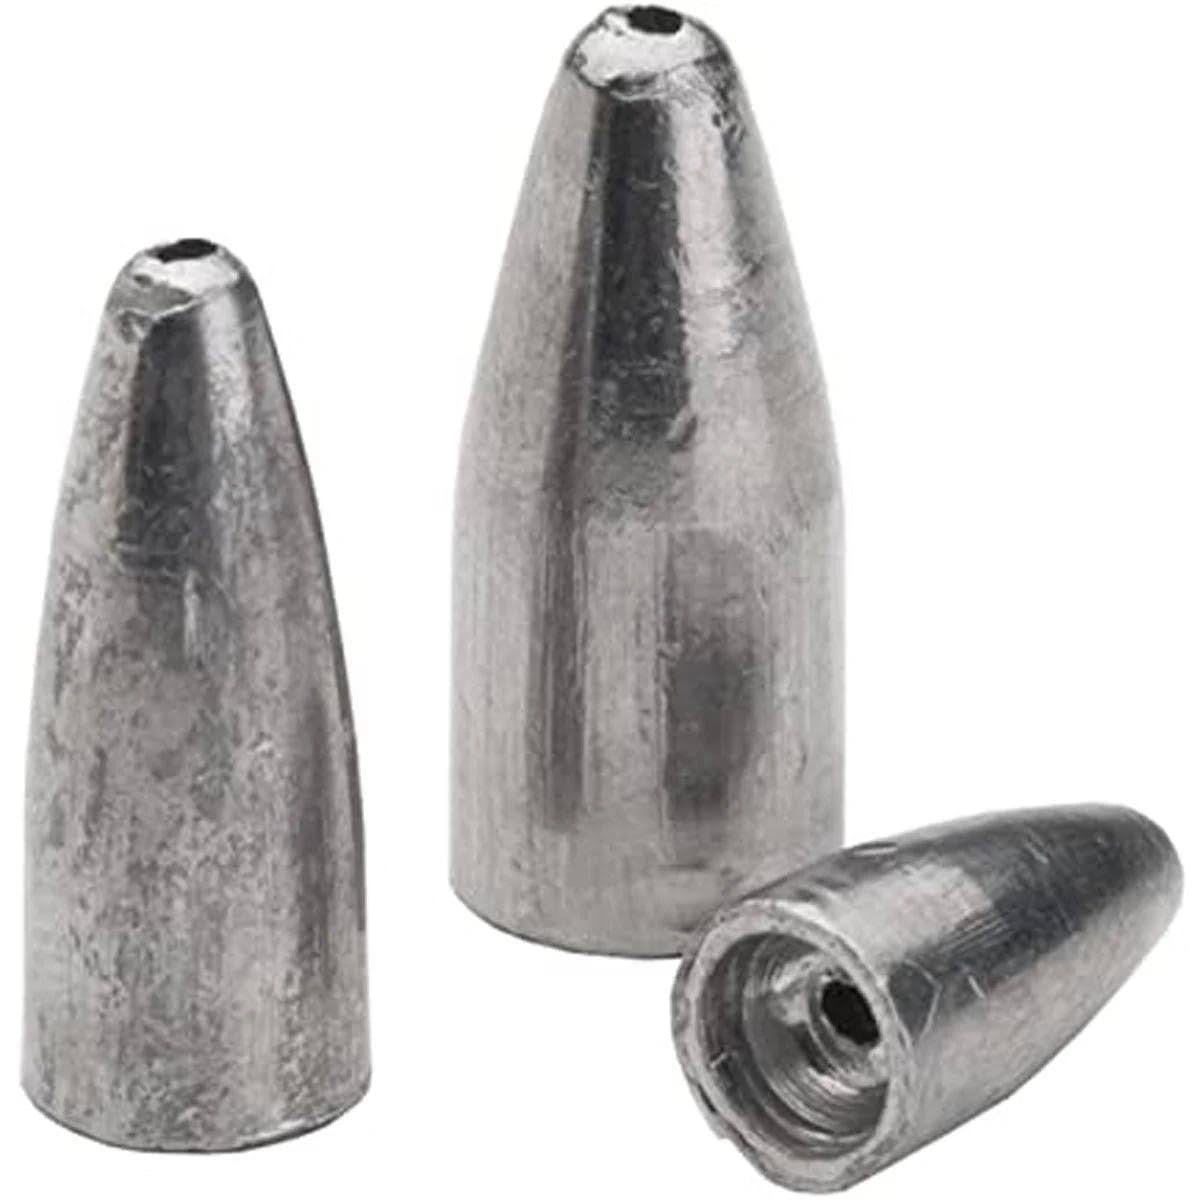 Bullet Weights 3/8oz